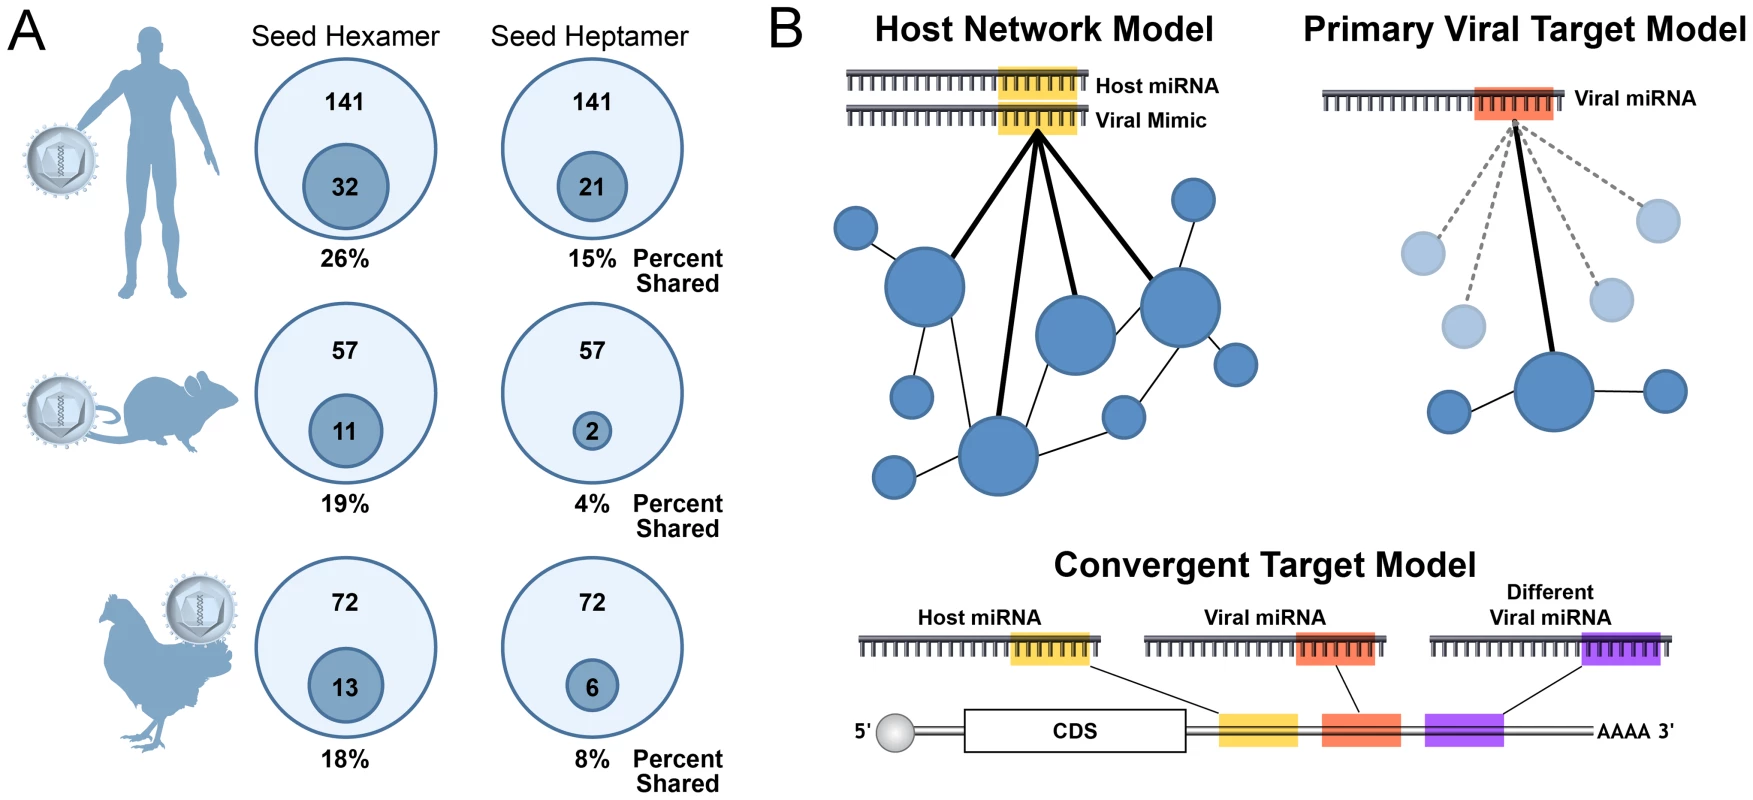 A minority of viral miRNAs mimic host miRNAs through identical seed sequences.